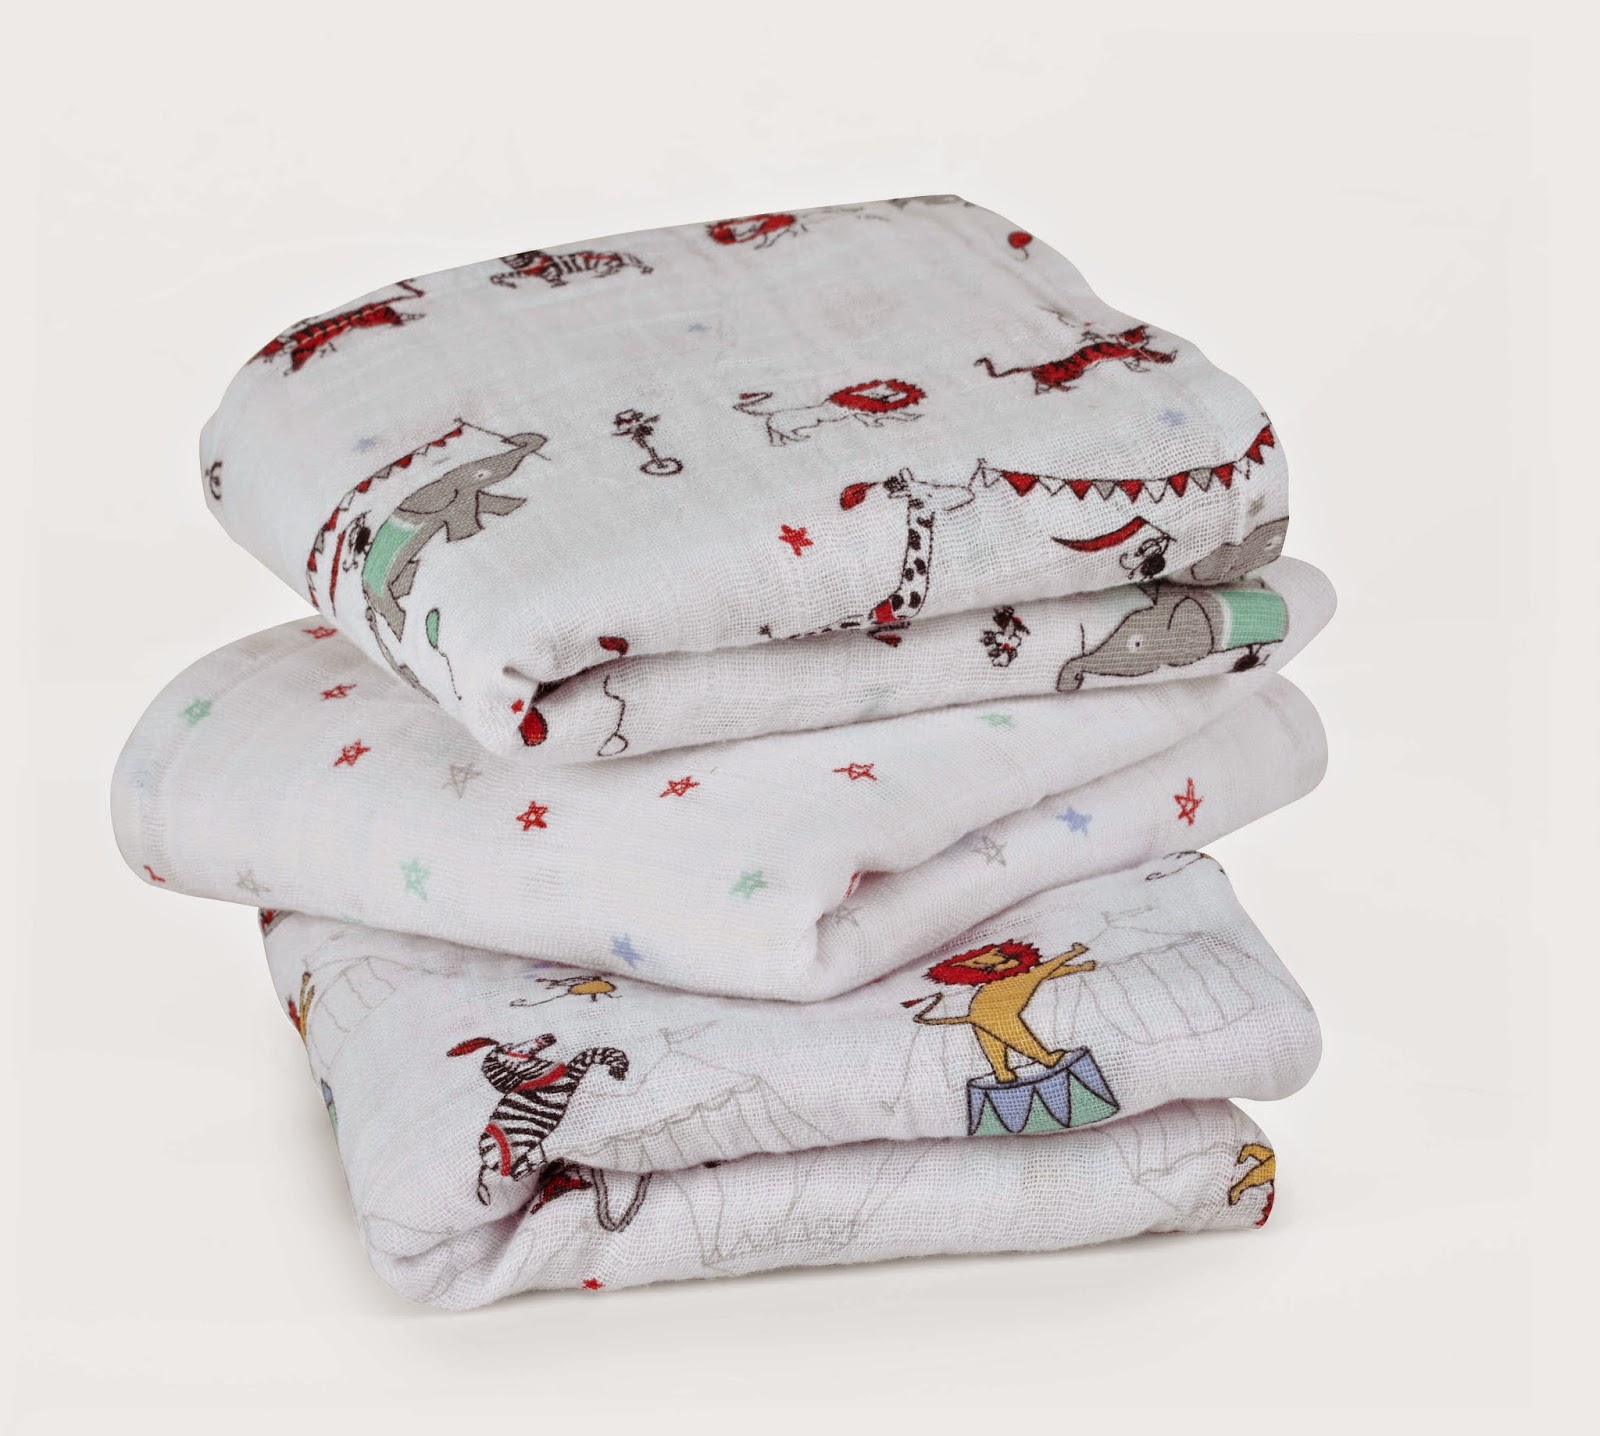 A peek at the new Aden + Anais collection & GIVEAWAY! | aden and anasi | muslins | musy | giveaway | competition | win | twitter | mamasVIB celbriteses | get the look | mamas essential | any bag essential | aden + anais | muslins for baby | new baby gift | win a set | swaddles | free | aden | must- have | baby buys |